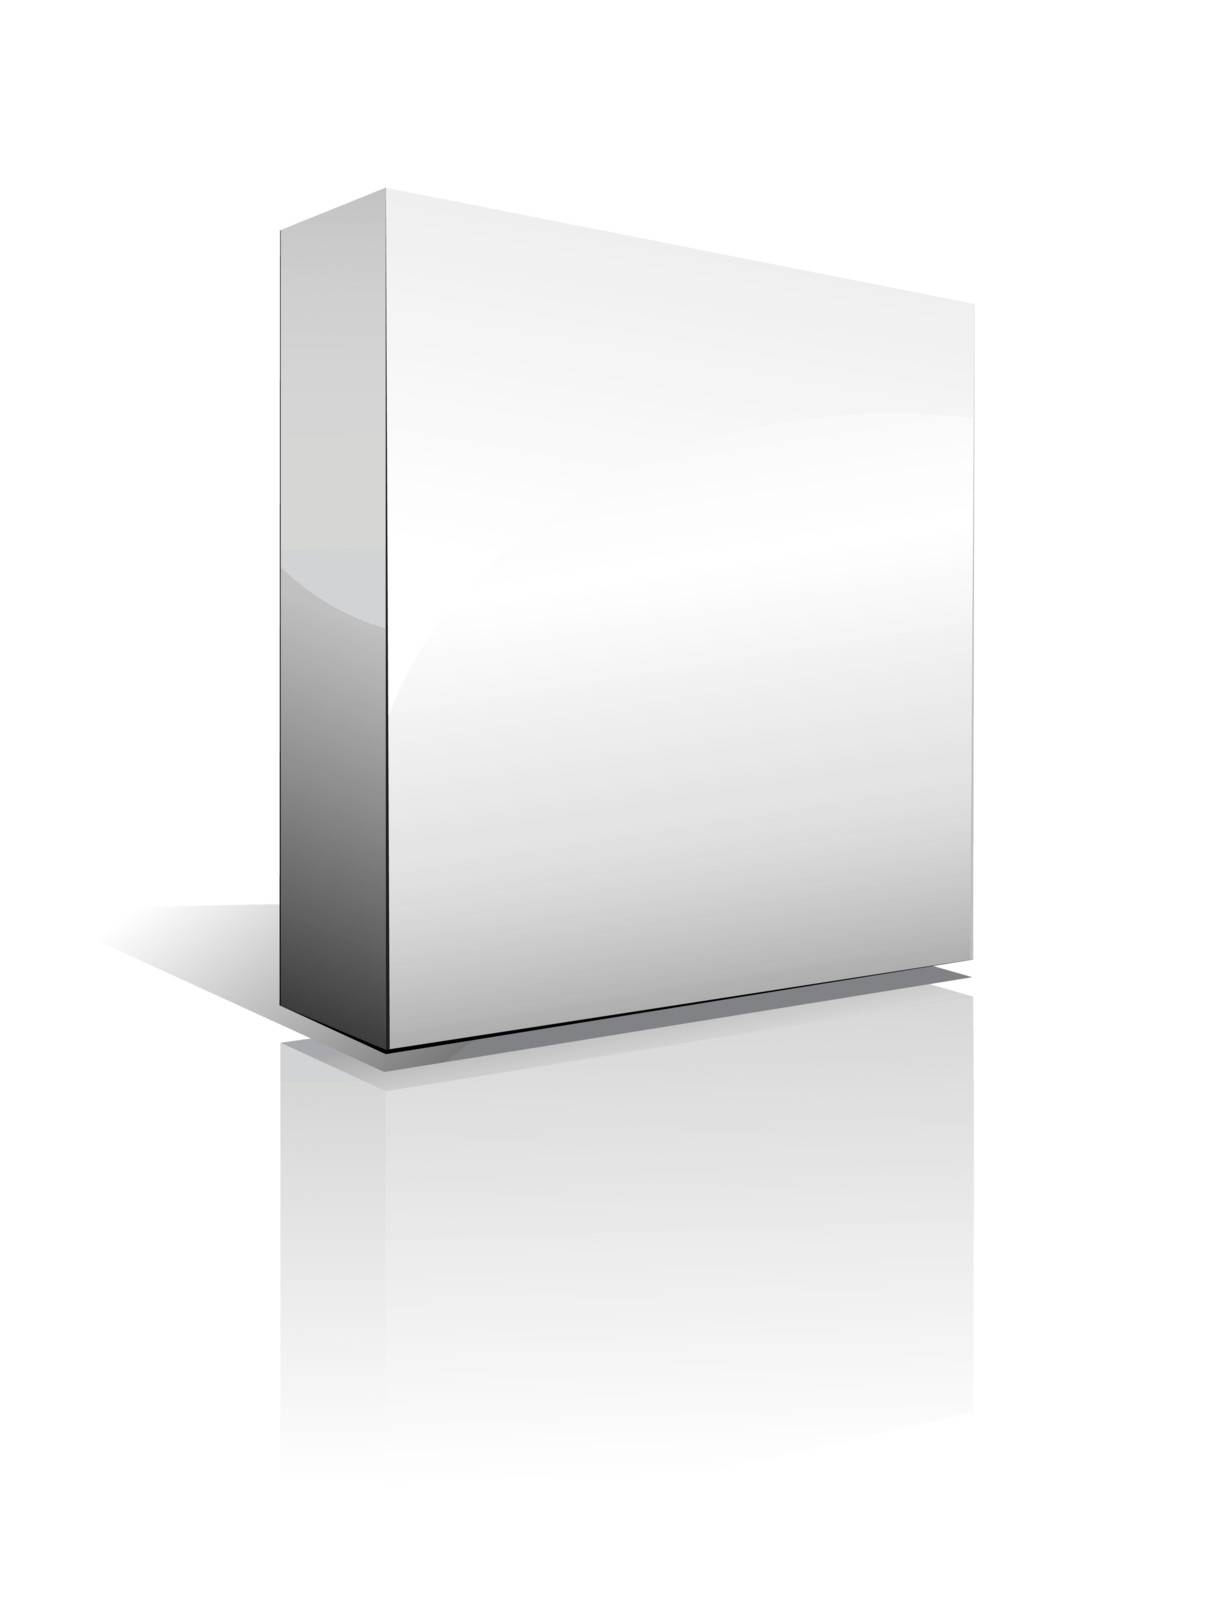 3D Box with reflection, Shadow and space for text or image